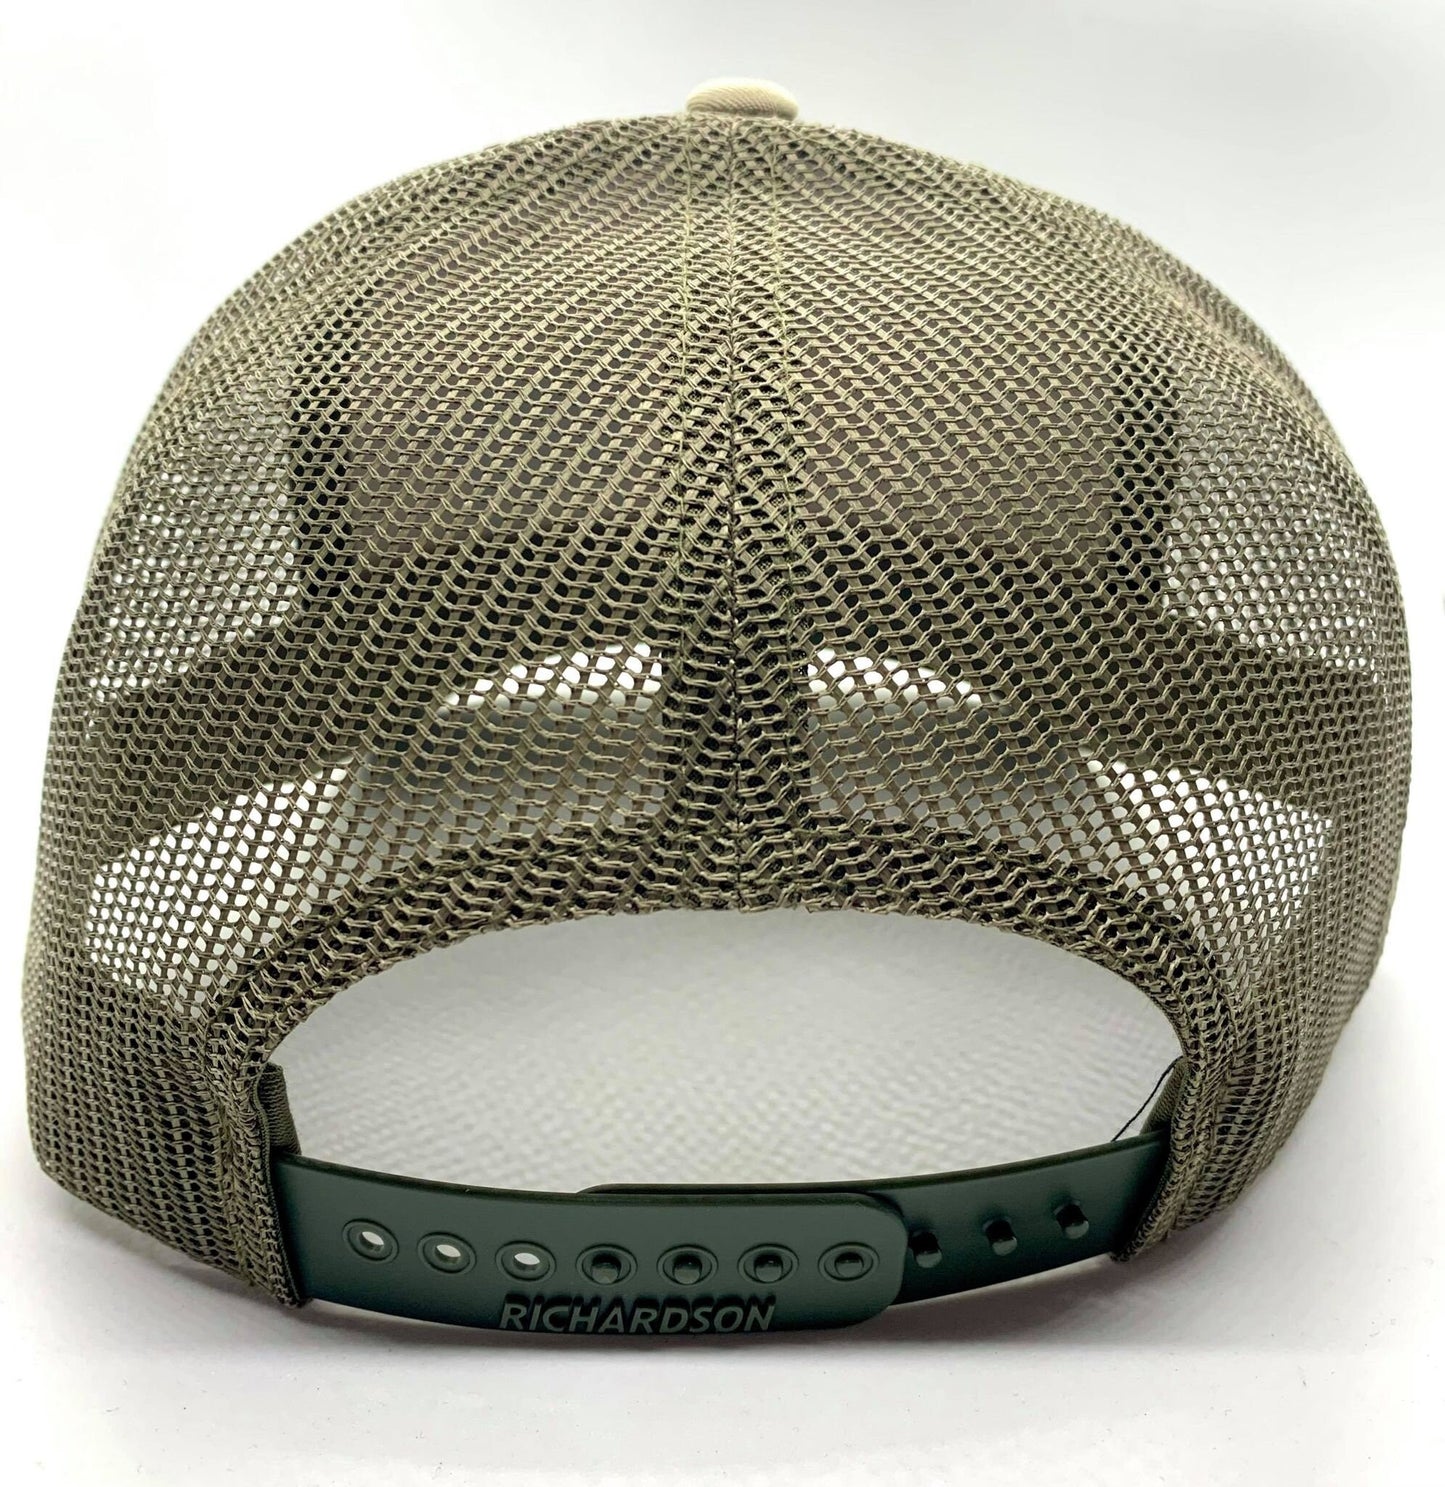 Any State Foothold Trap in Pale Khaki/Loden Mesh Richardson Five-Panel Adjustable Snap Back Hat